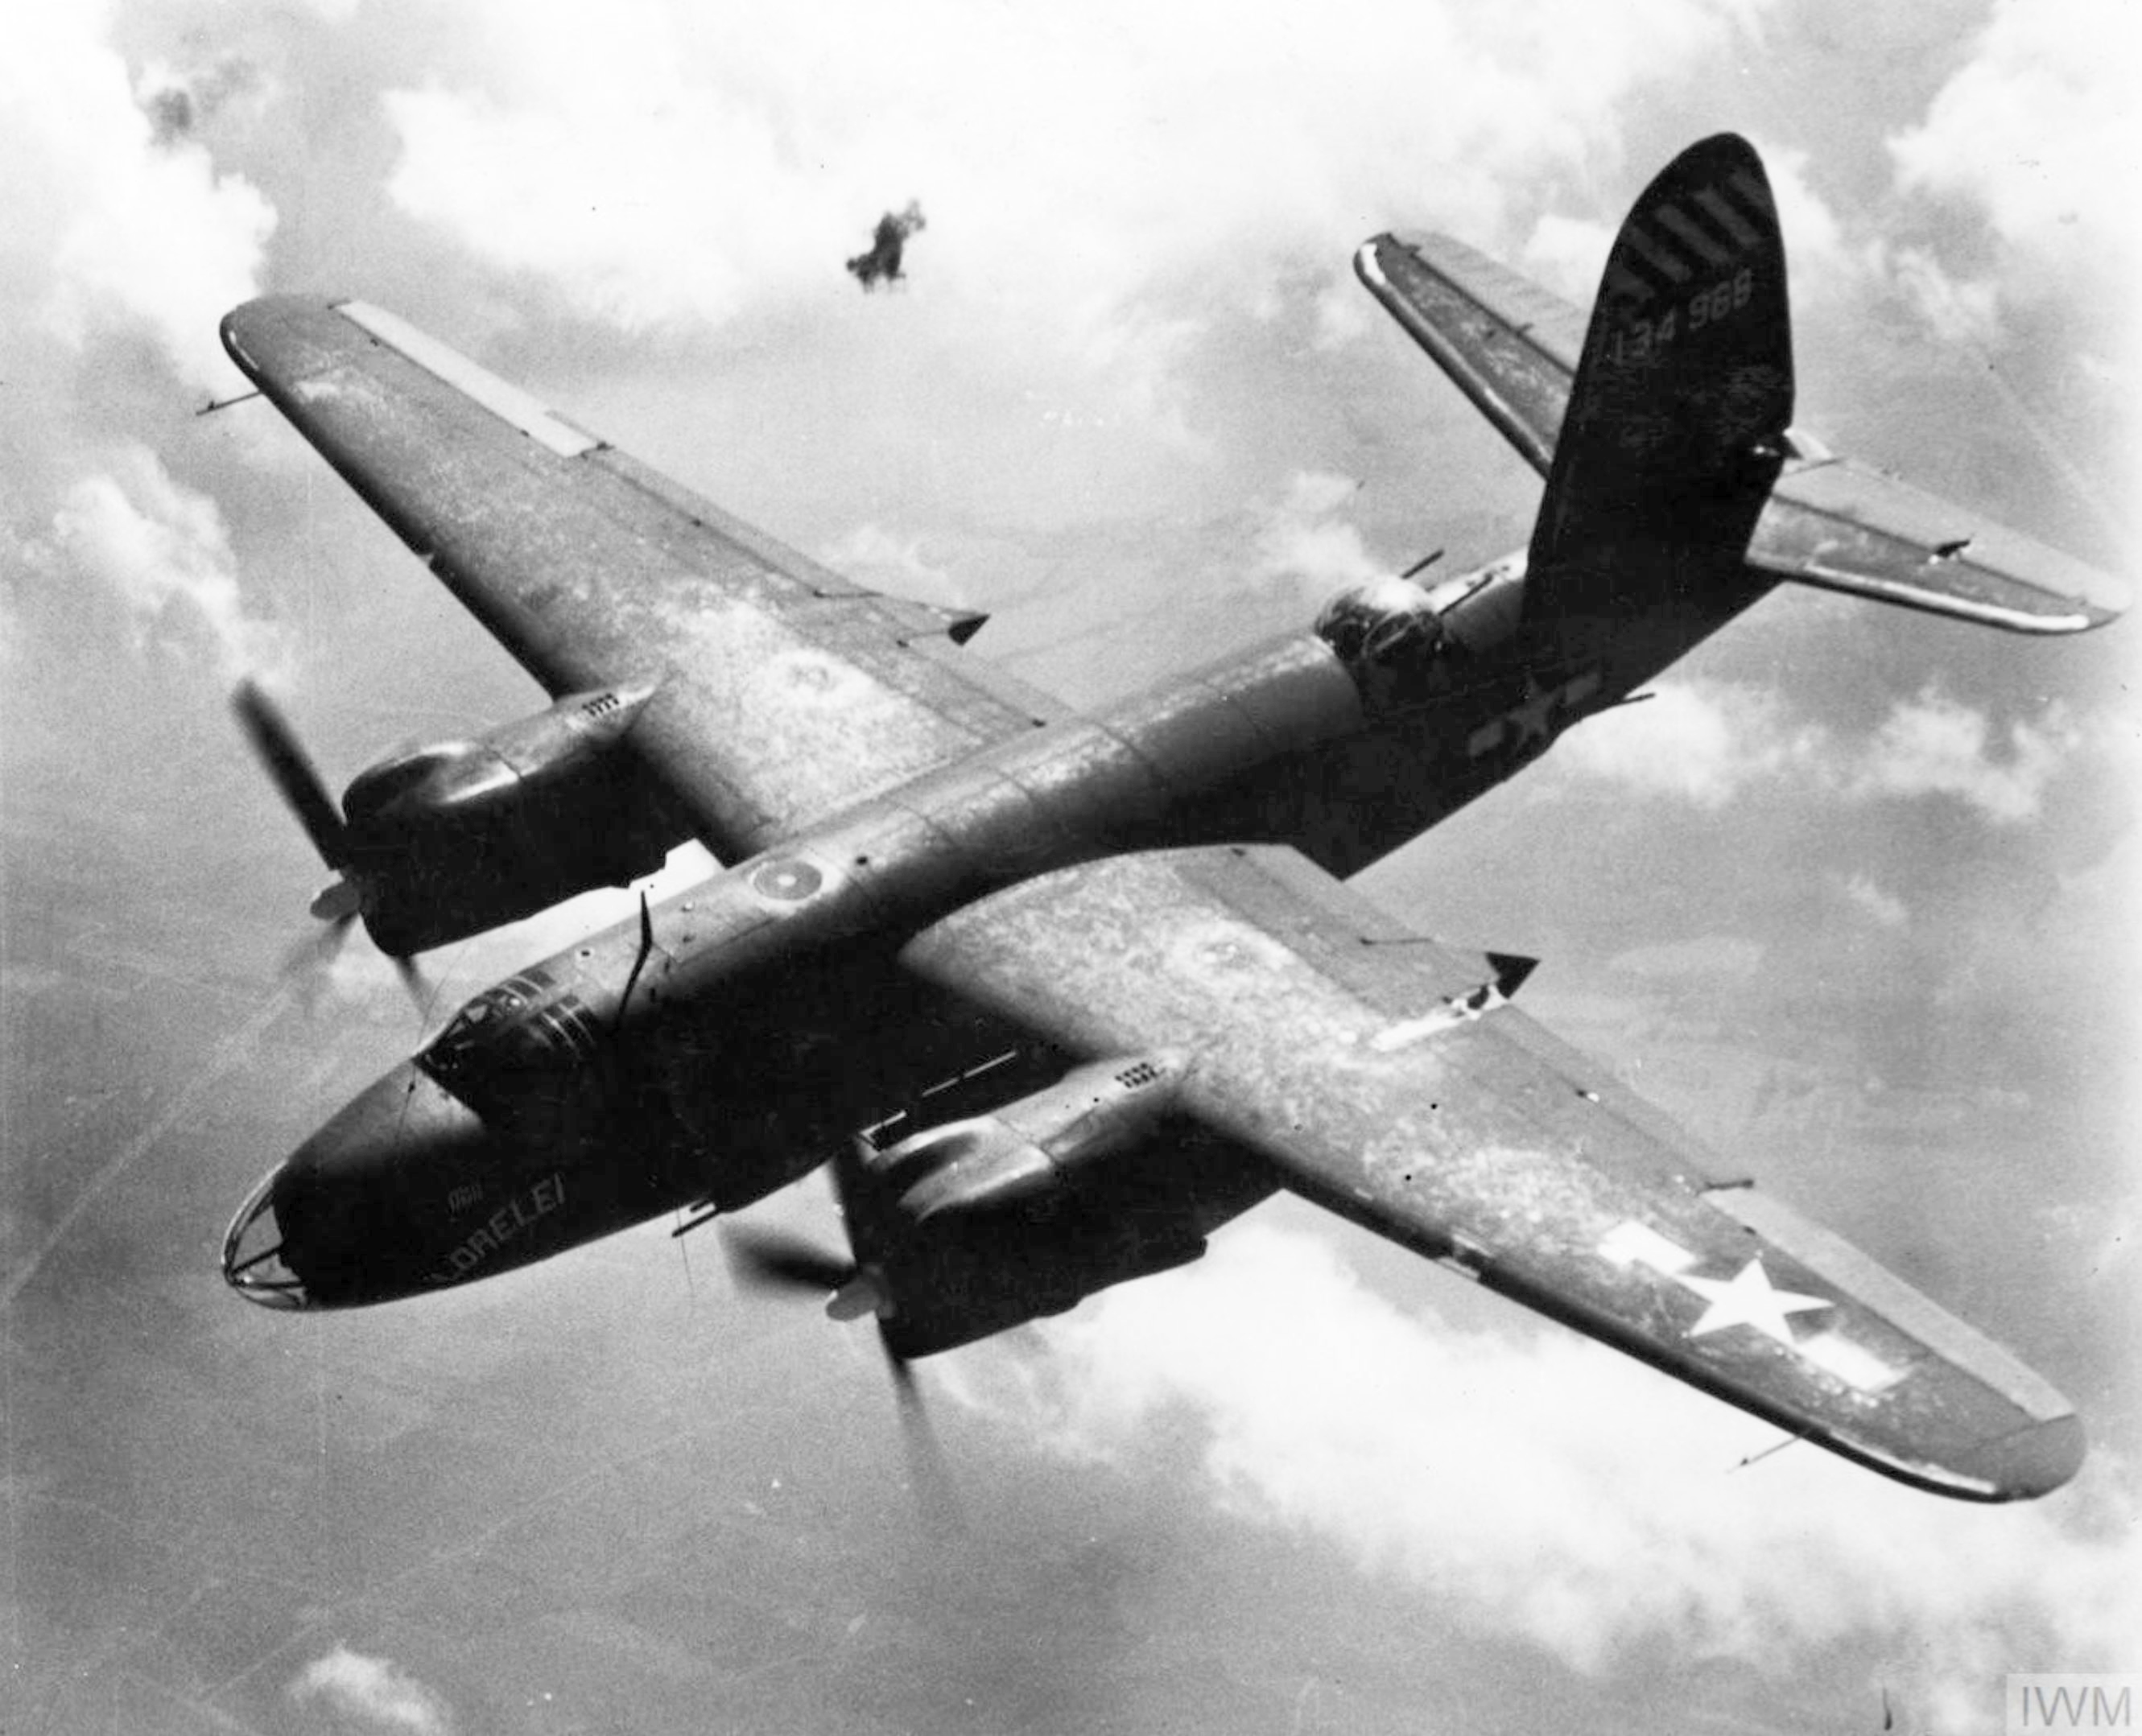 41 34968 B 26C Marauder 8AF 387BG558BS KXL Lorelei later lost to enemy action 23rd Jun 1944 FRE1296